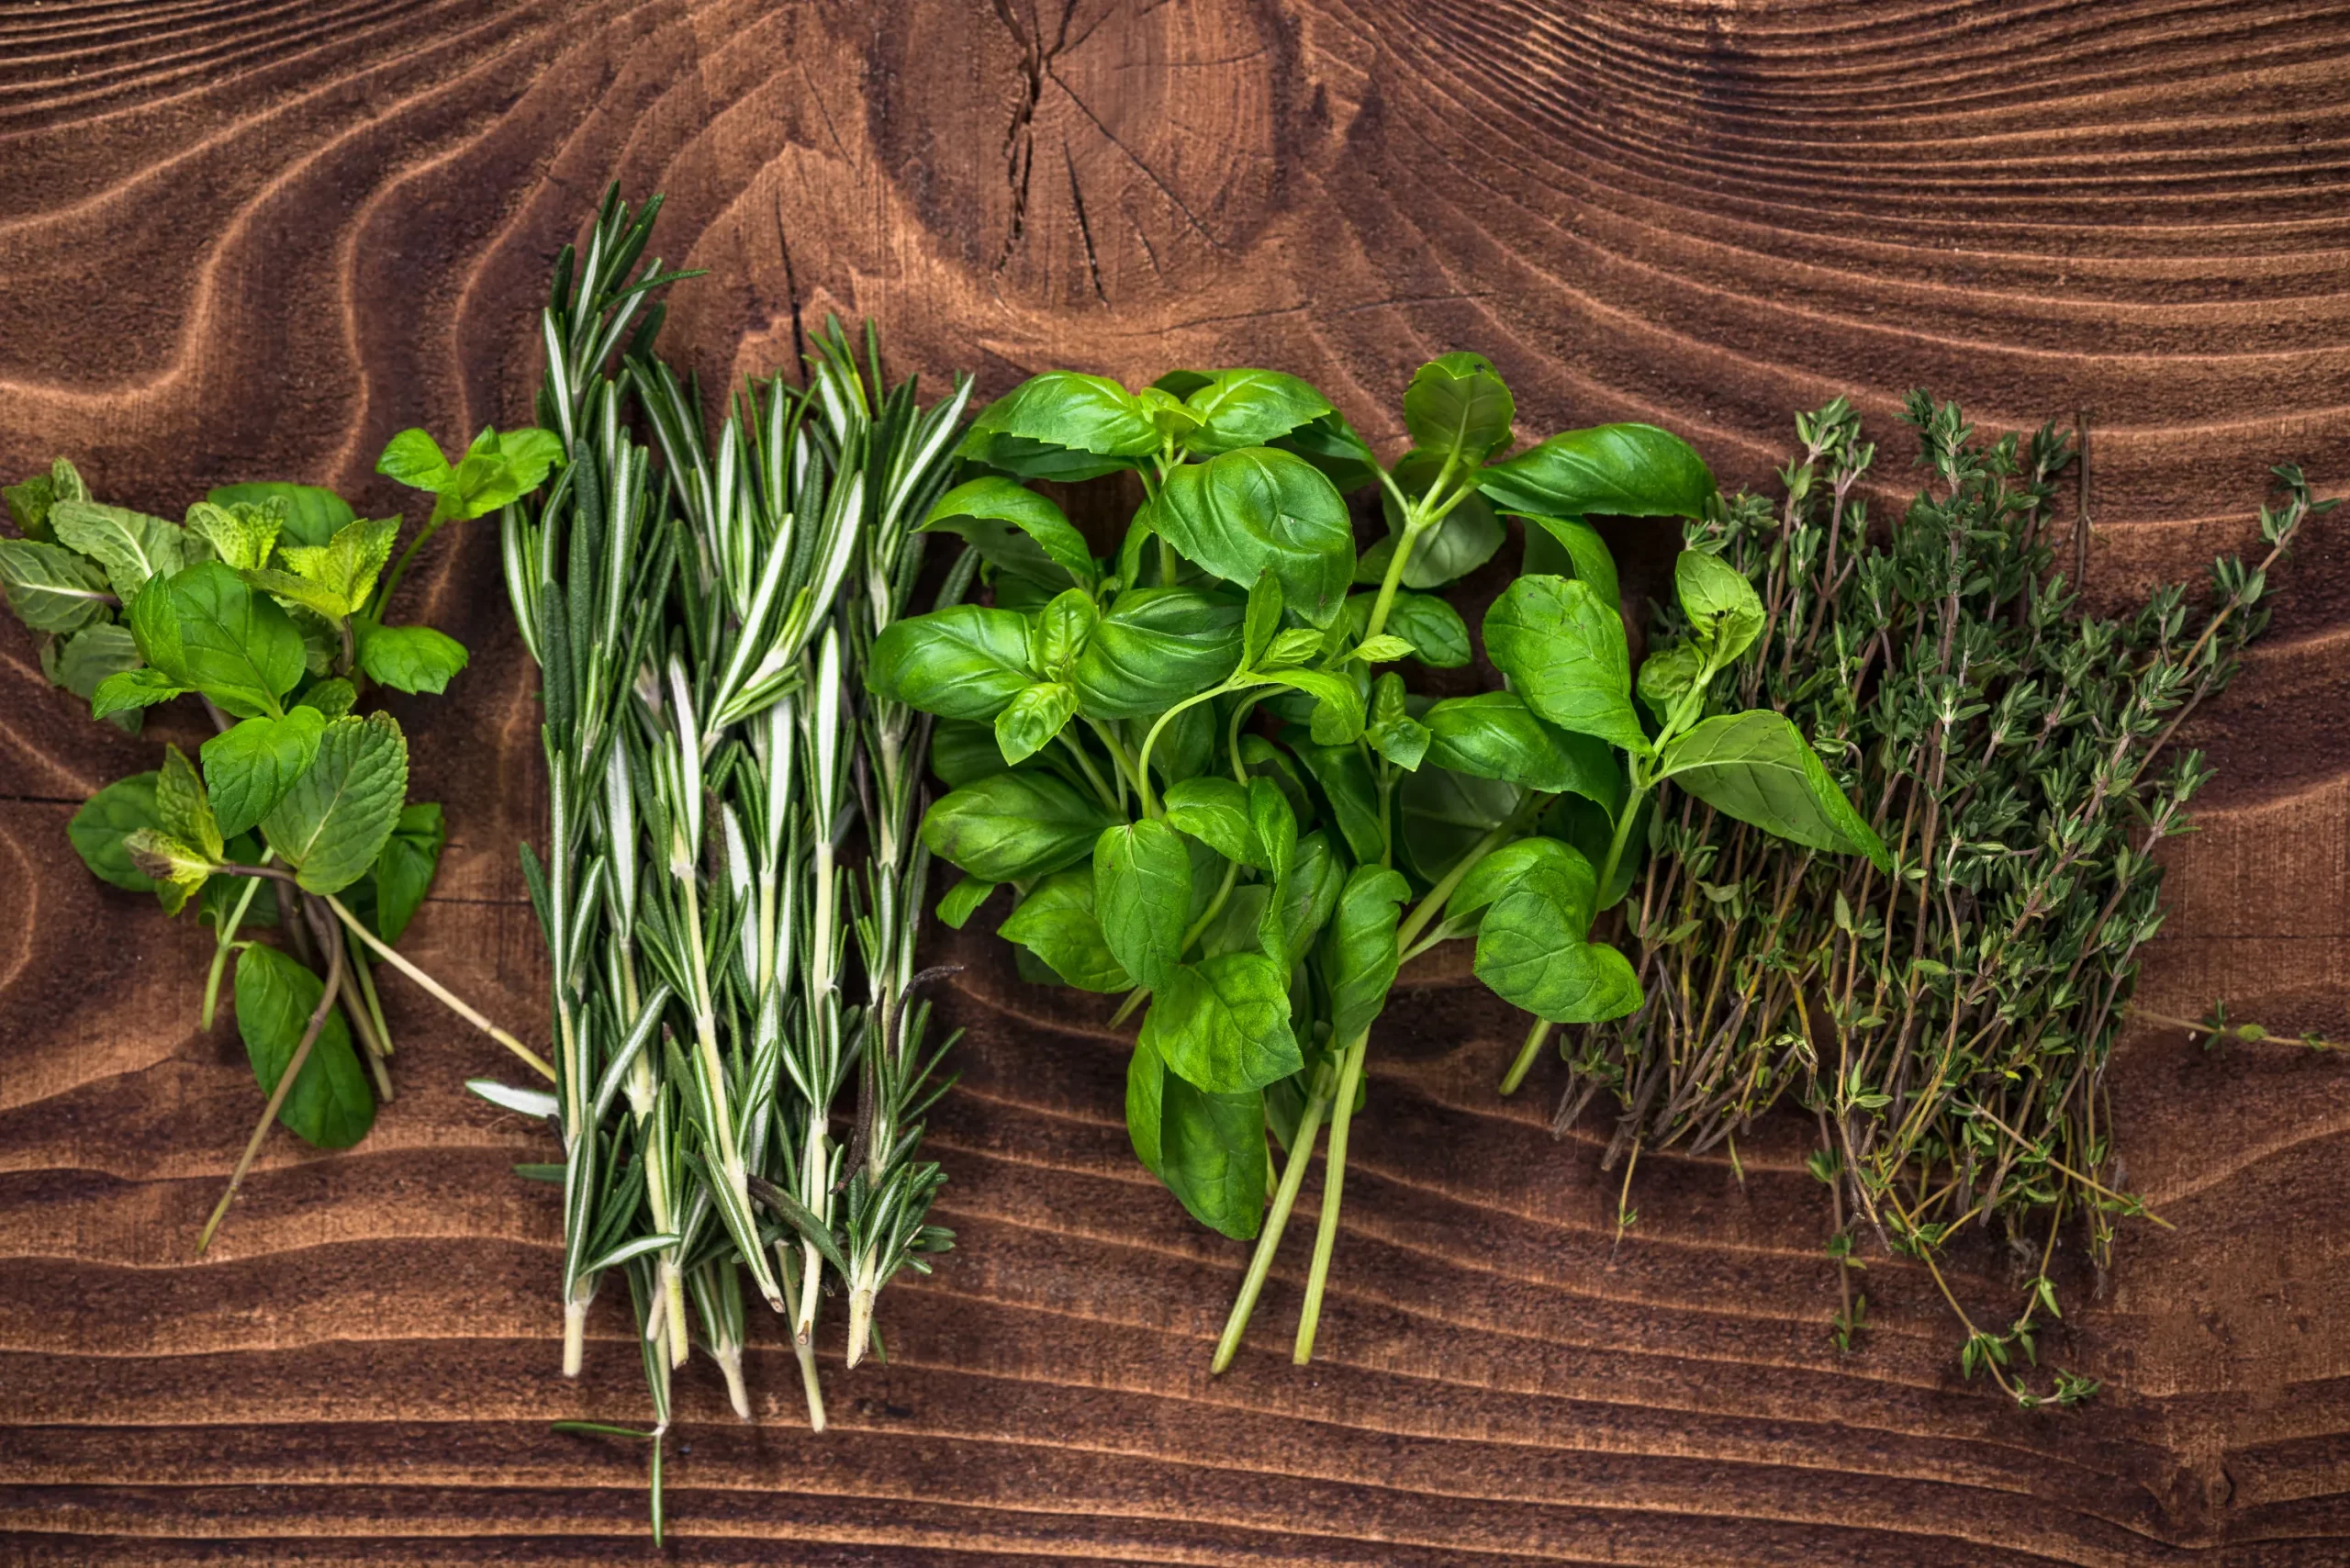 Organic Fresh Herbs: Elevating the Nutritional Value and Aroma of Your Food